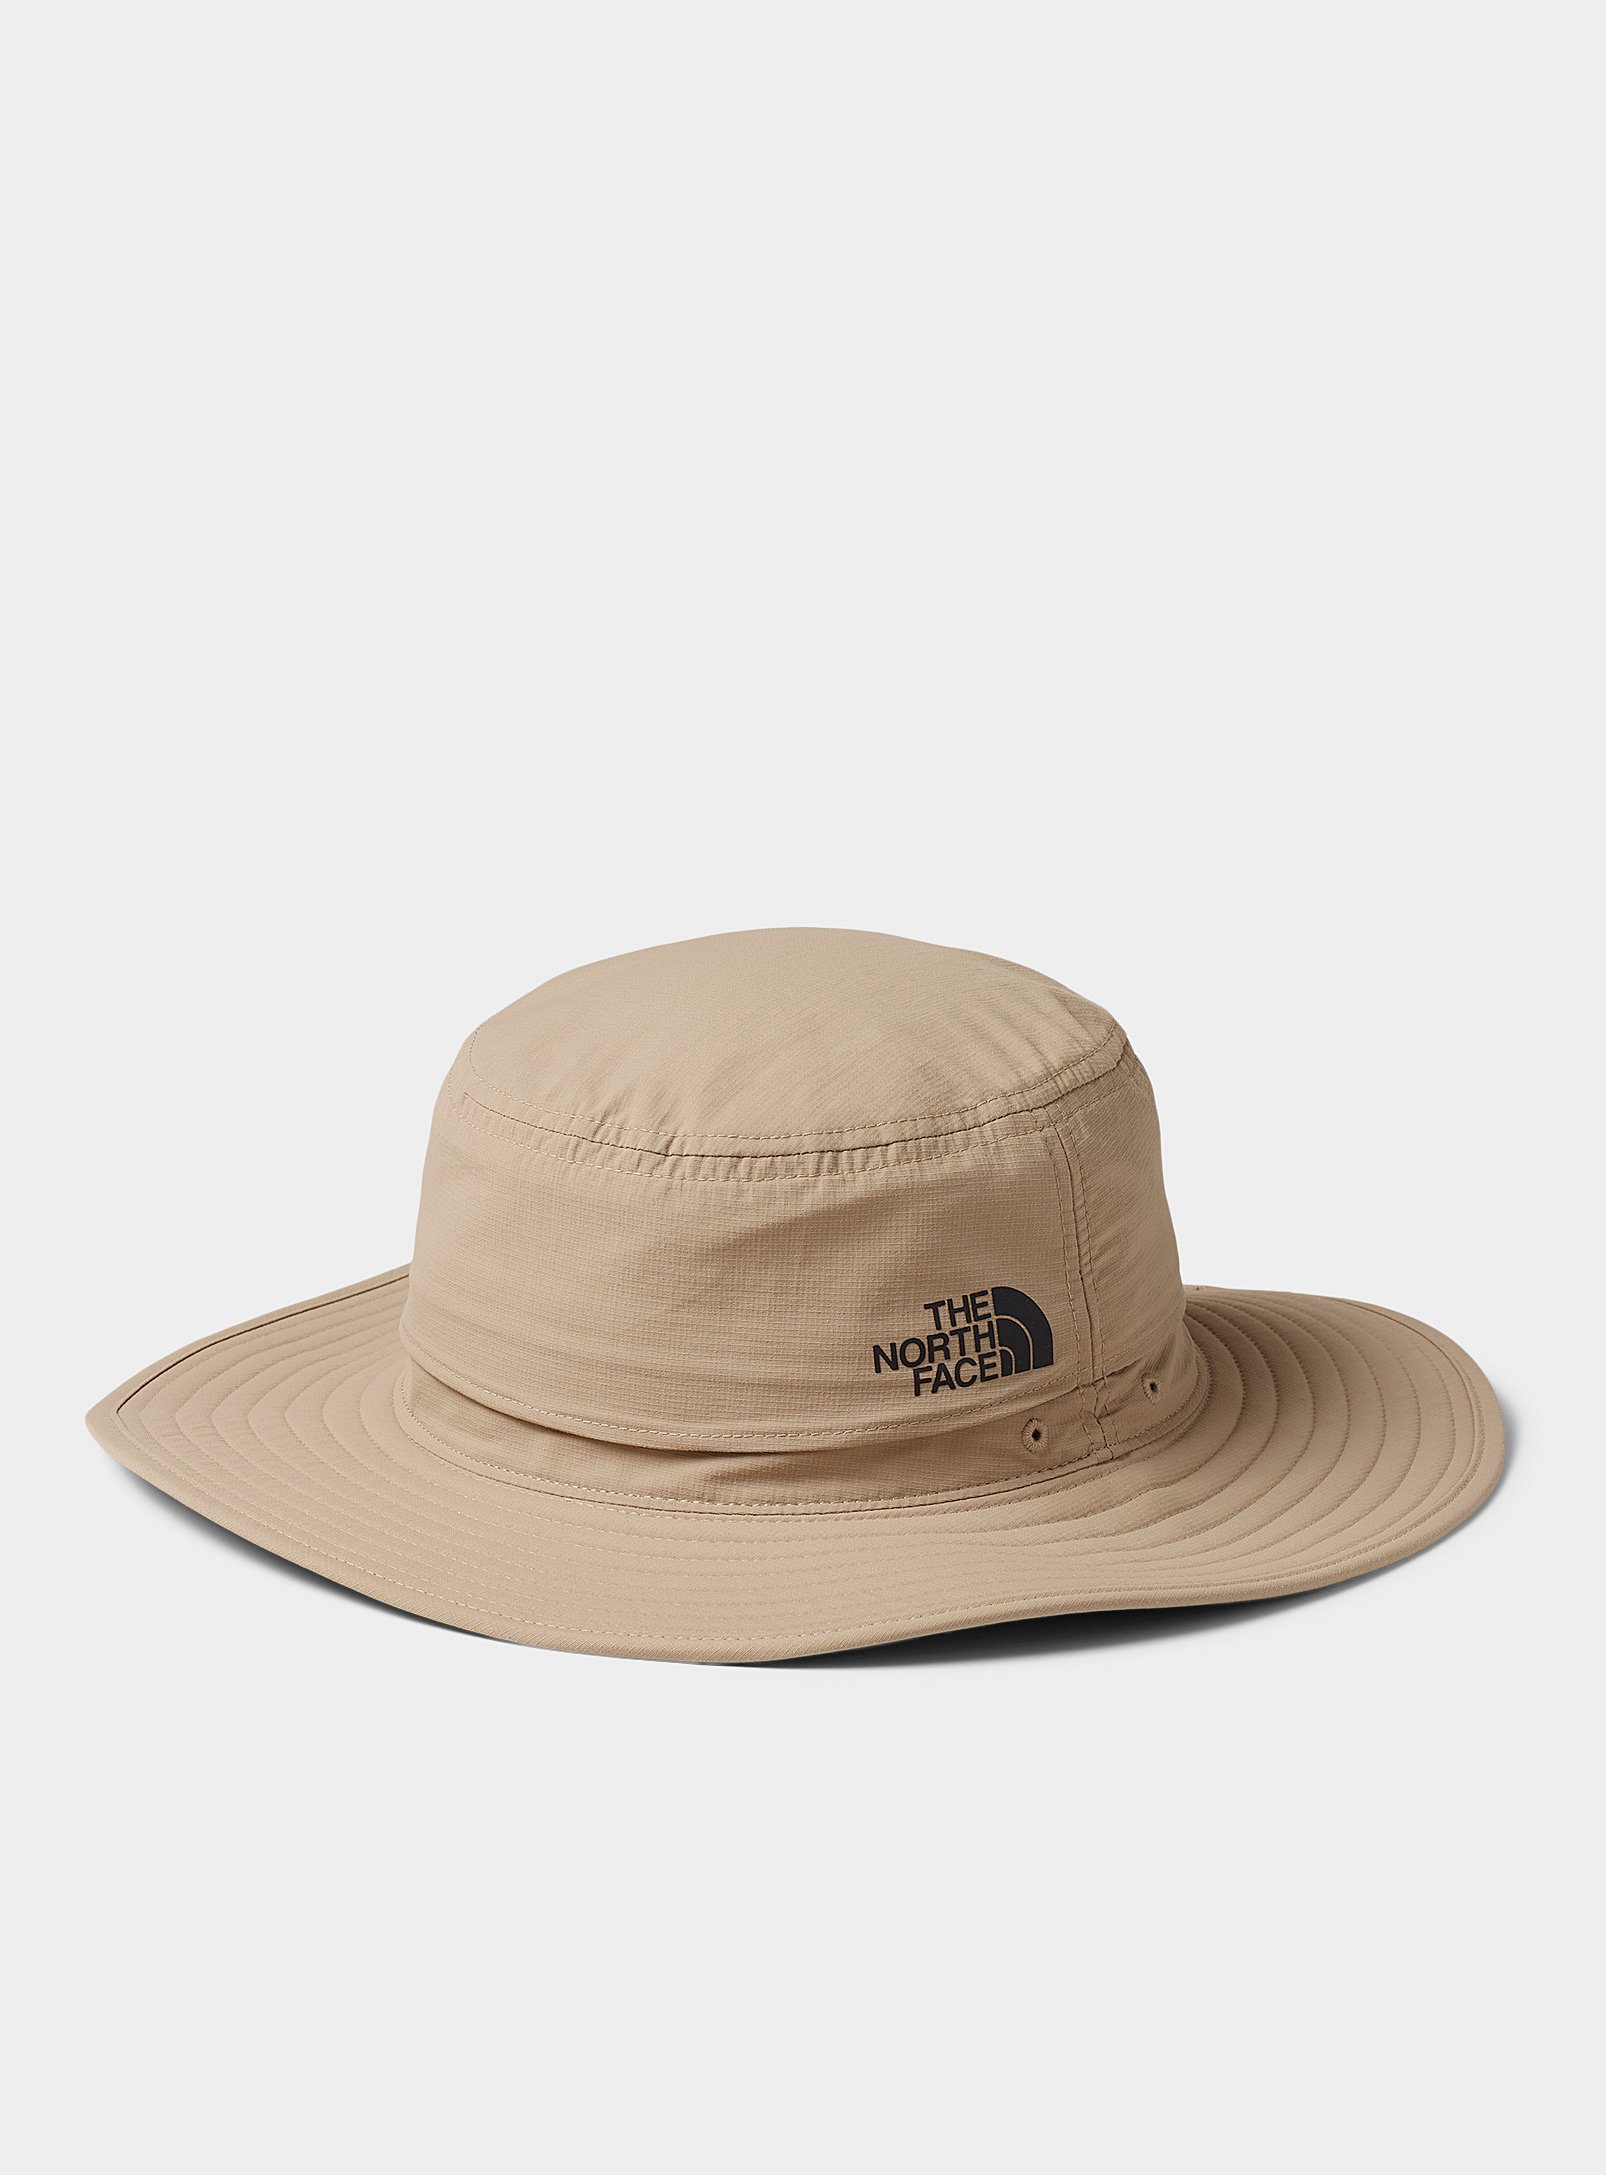 The North Face - Women's Utility fisherman hat